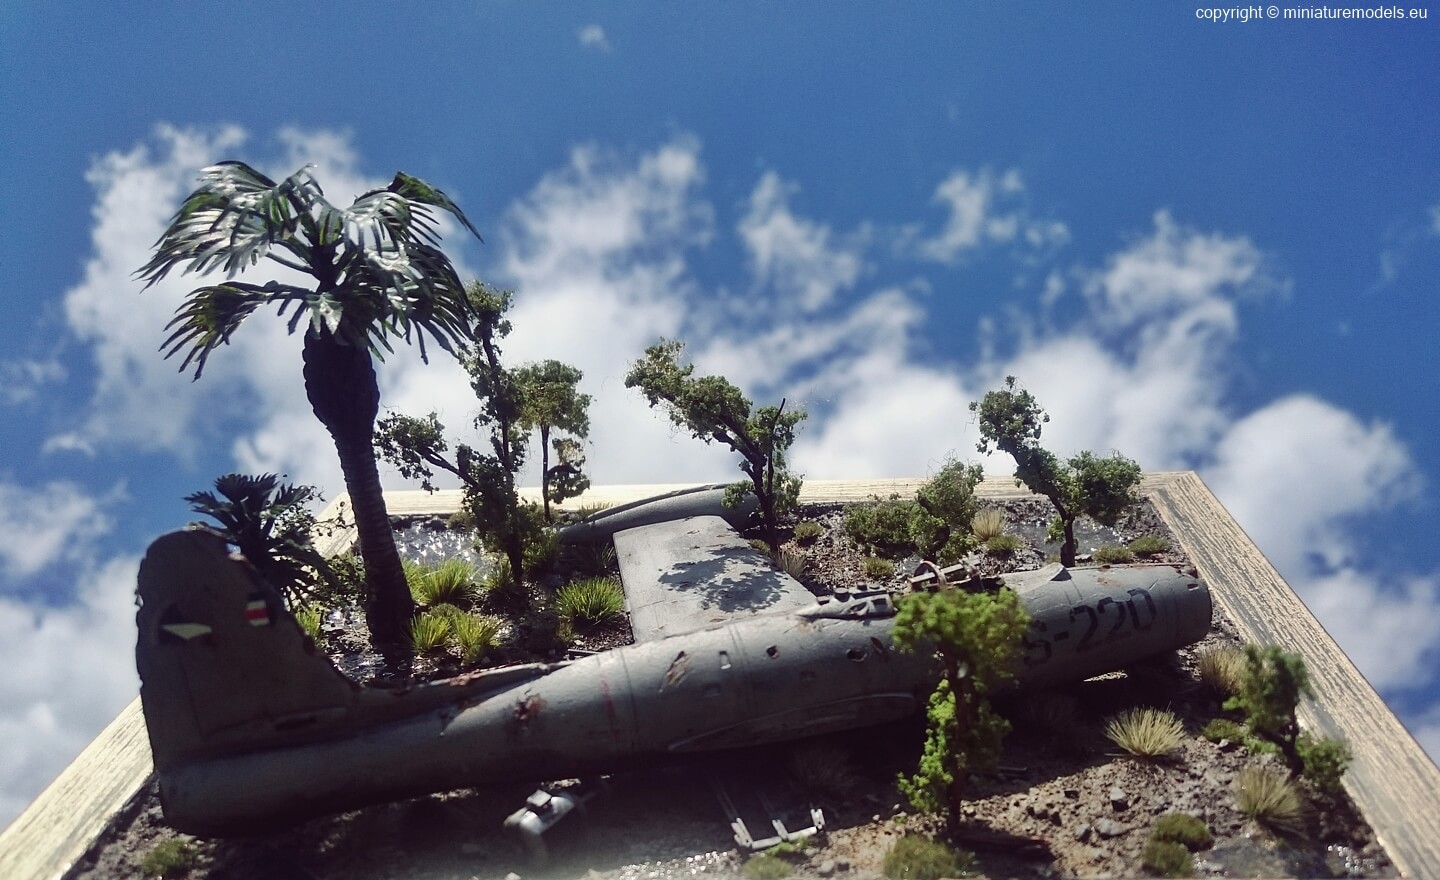 plane wreck in sunny Vietnam with sky and clouds in background